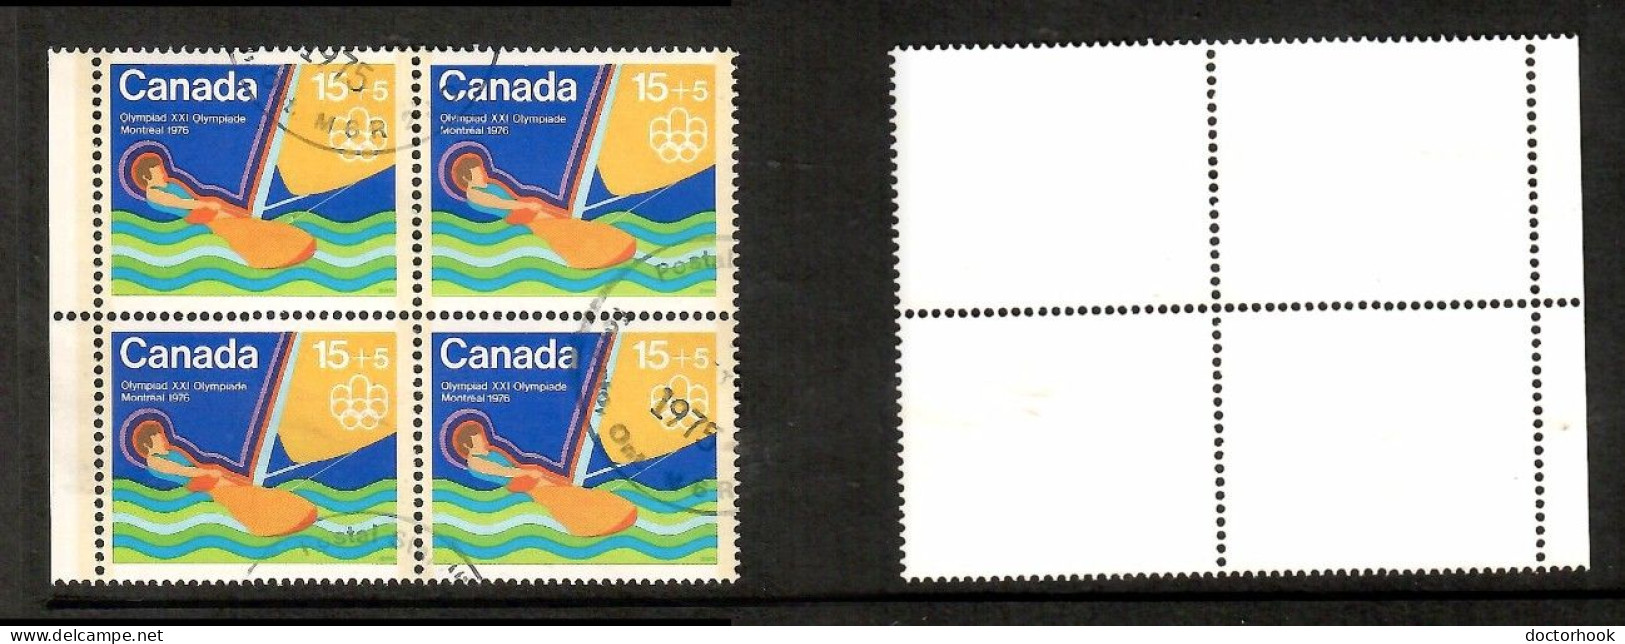 CANADA   Scott # B 6 USED BLOCK Of 4 (CONDITION AS PER SCAN) (CAN-211) - Blocks & Sheetlets